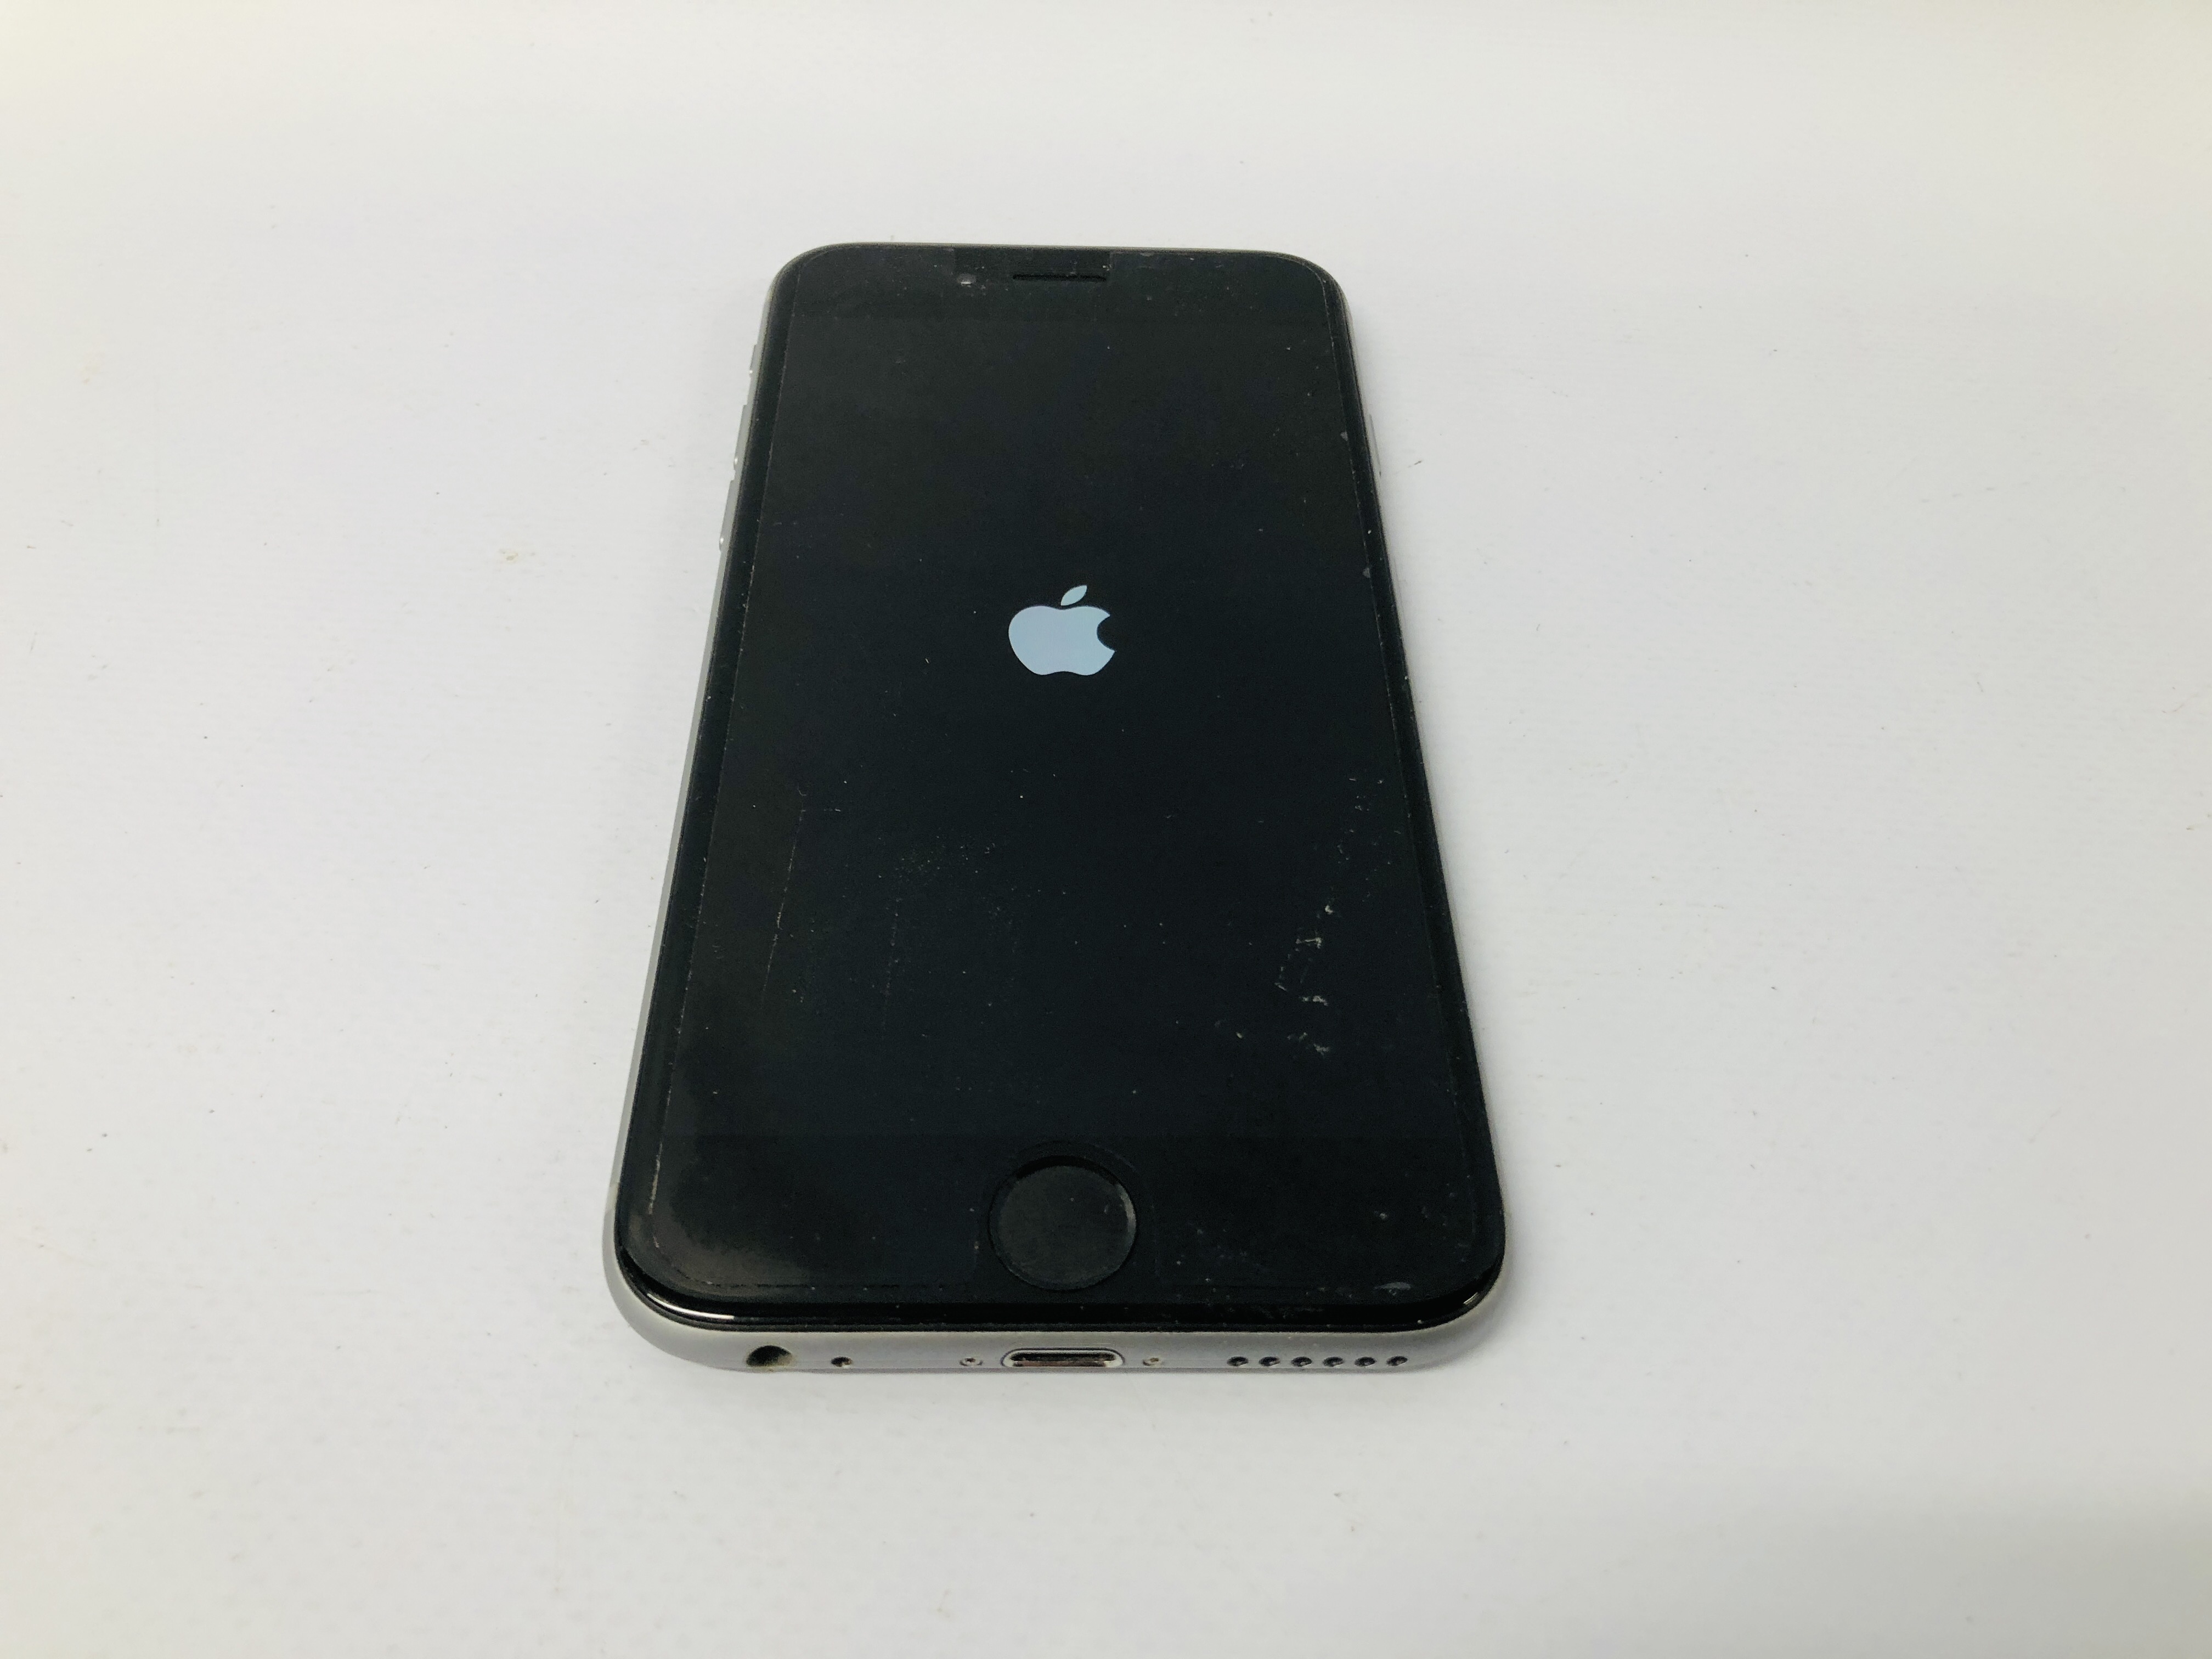 APPLE IPHONE 6 32GB - NO GUARANTEE OF CONNECTIVITY. SOLD AS SEEN.